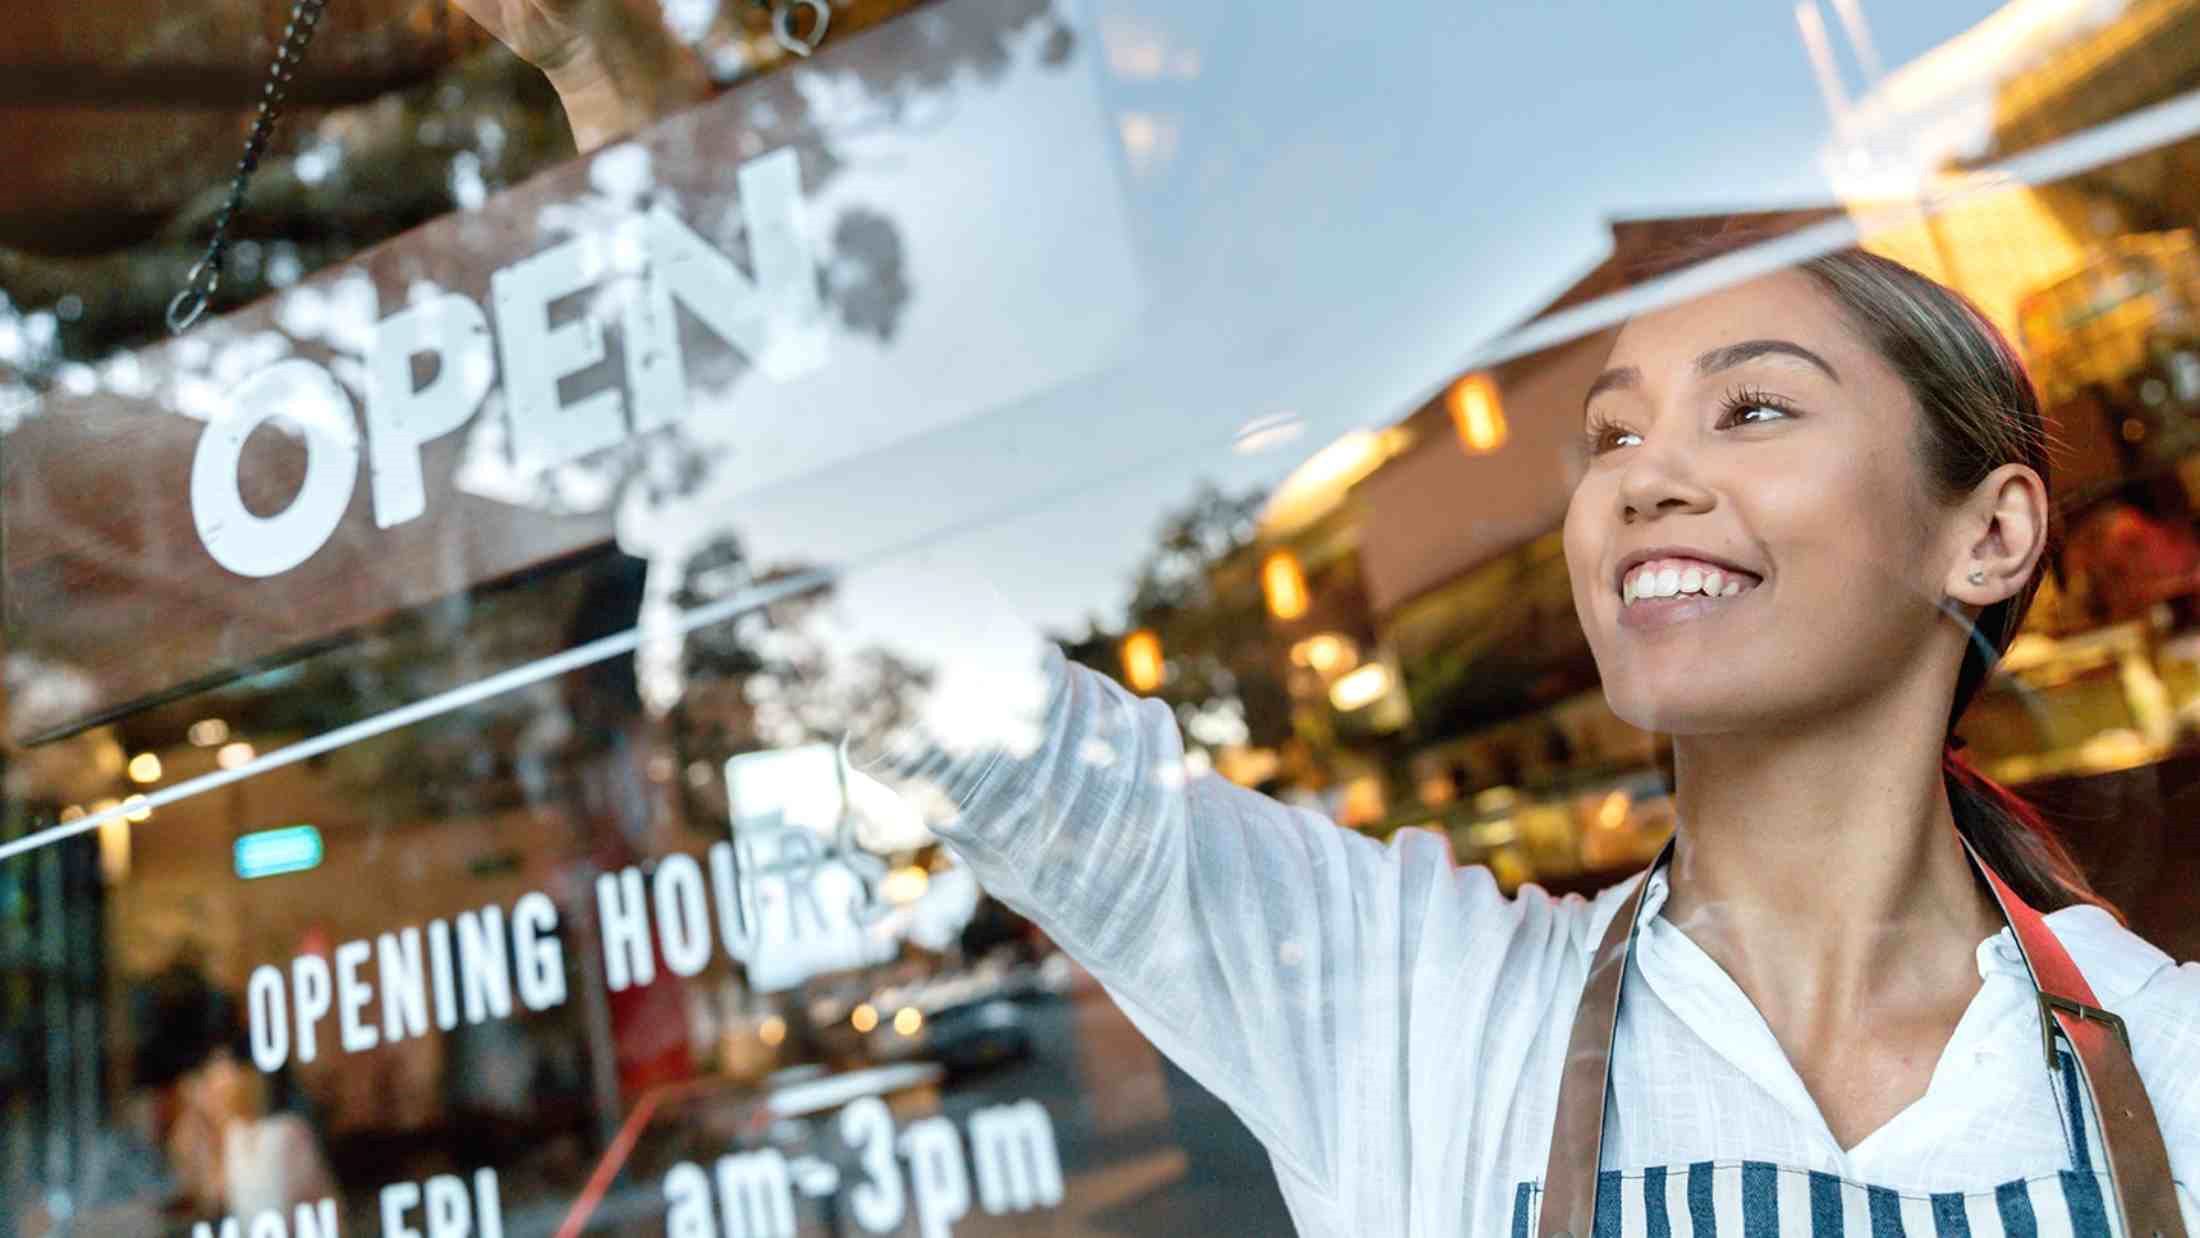 Photo of Woman Smiling While Holding Open Signage